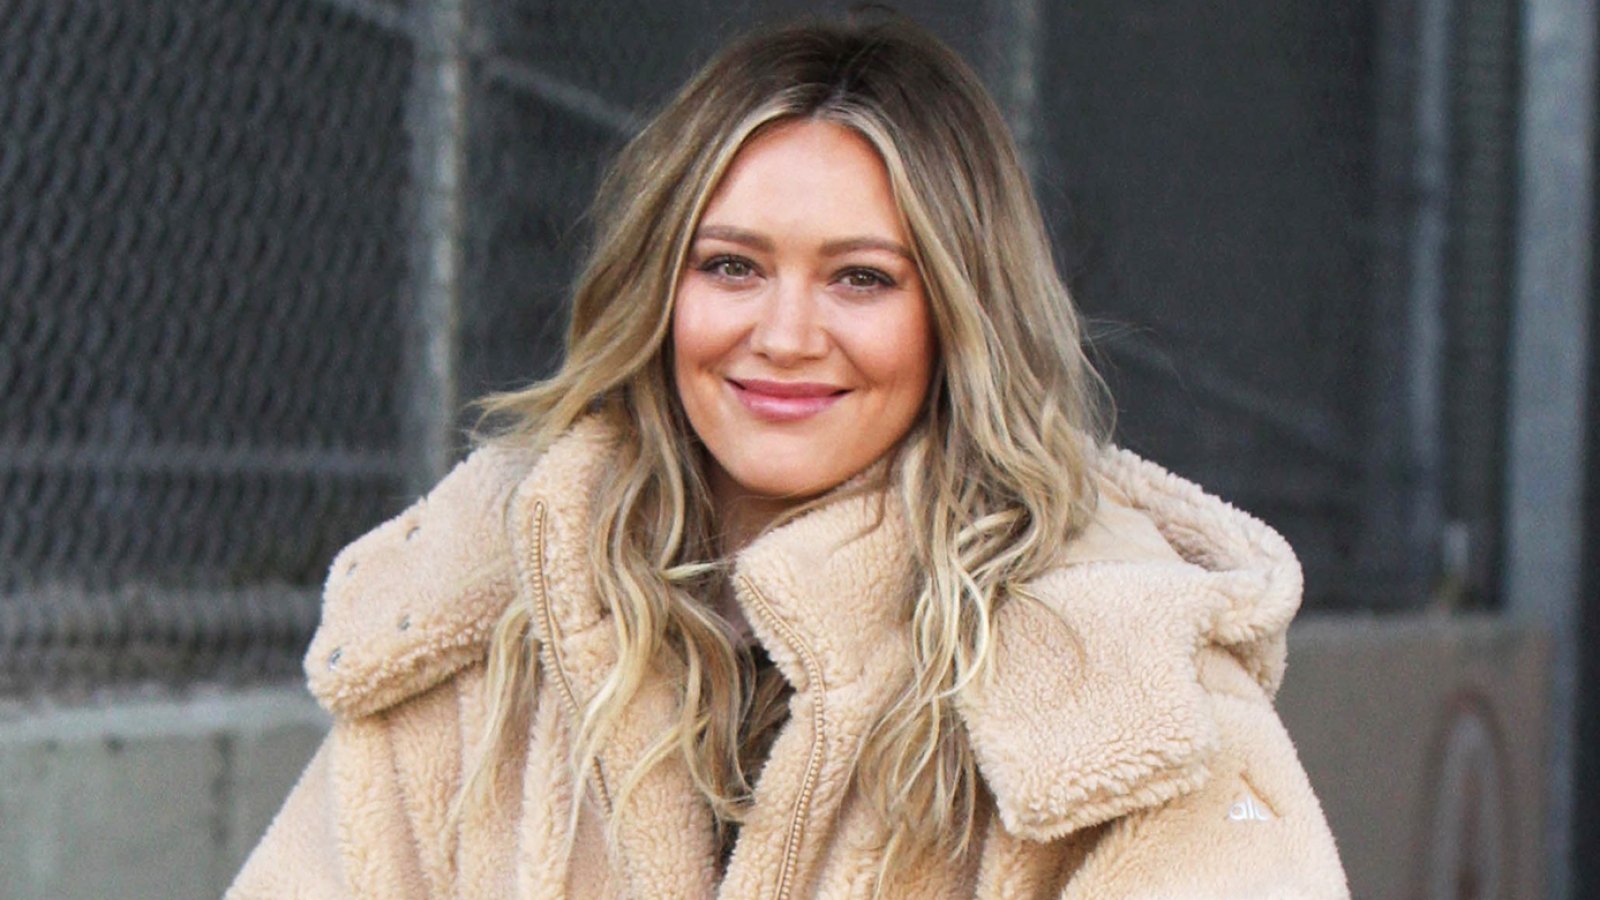 Hilary Duff Brings 3-Month-Old Daughter Banks to ‘Younger’ Set: ‘I Think I Scared Her’